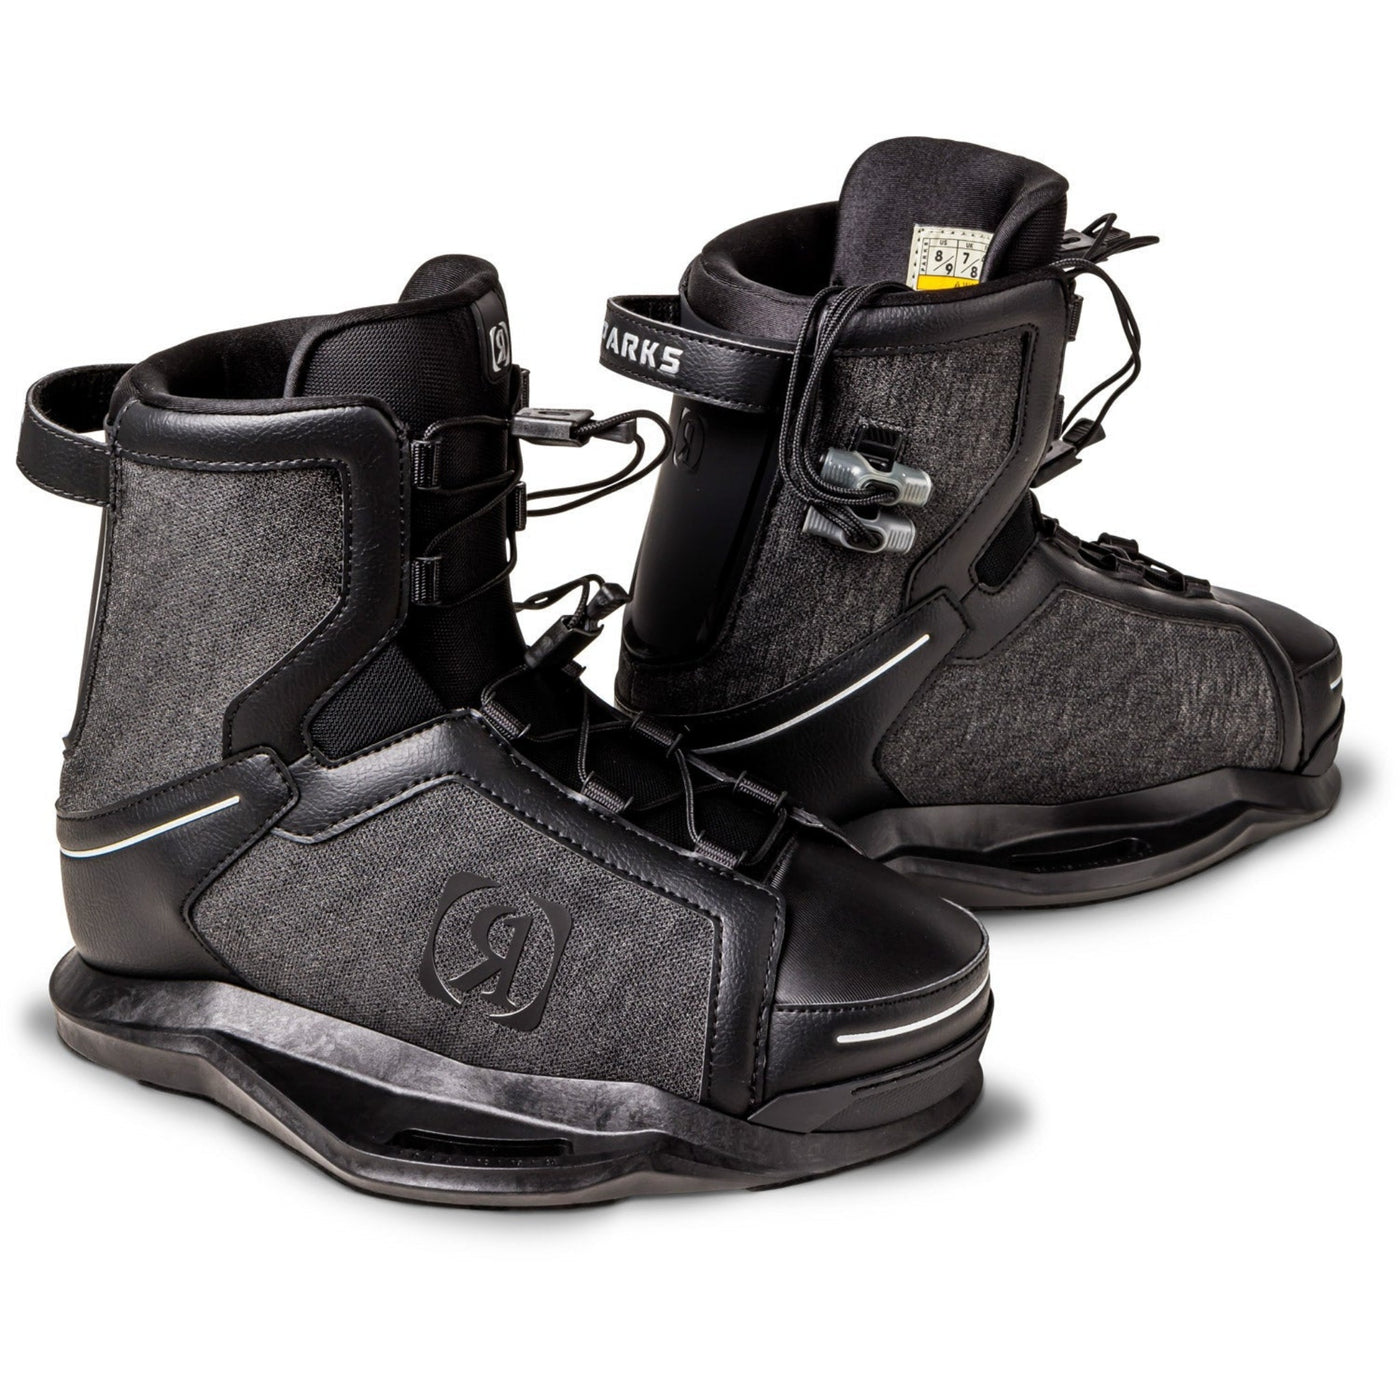 Ronix RXT Wakeboard W/ Parks Boots 2024